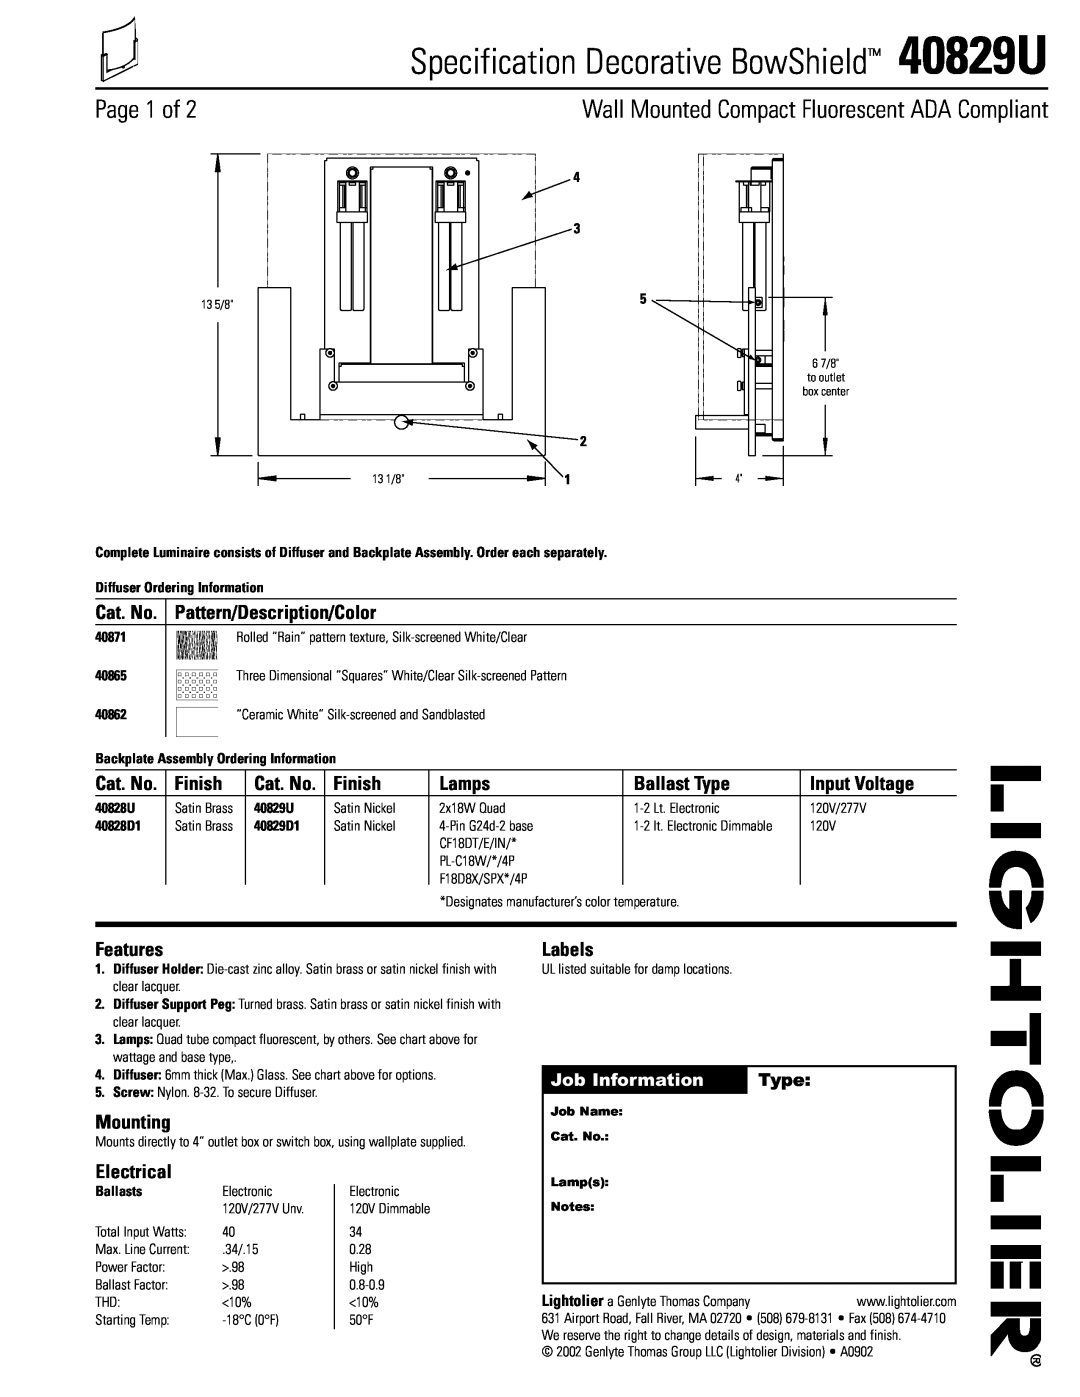 Lightolier manual Specification Decorative BowShield 40829U, Page 1 of, Wall Mounted Compact Fluorescent ADA Compliant 